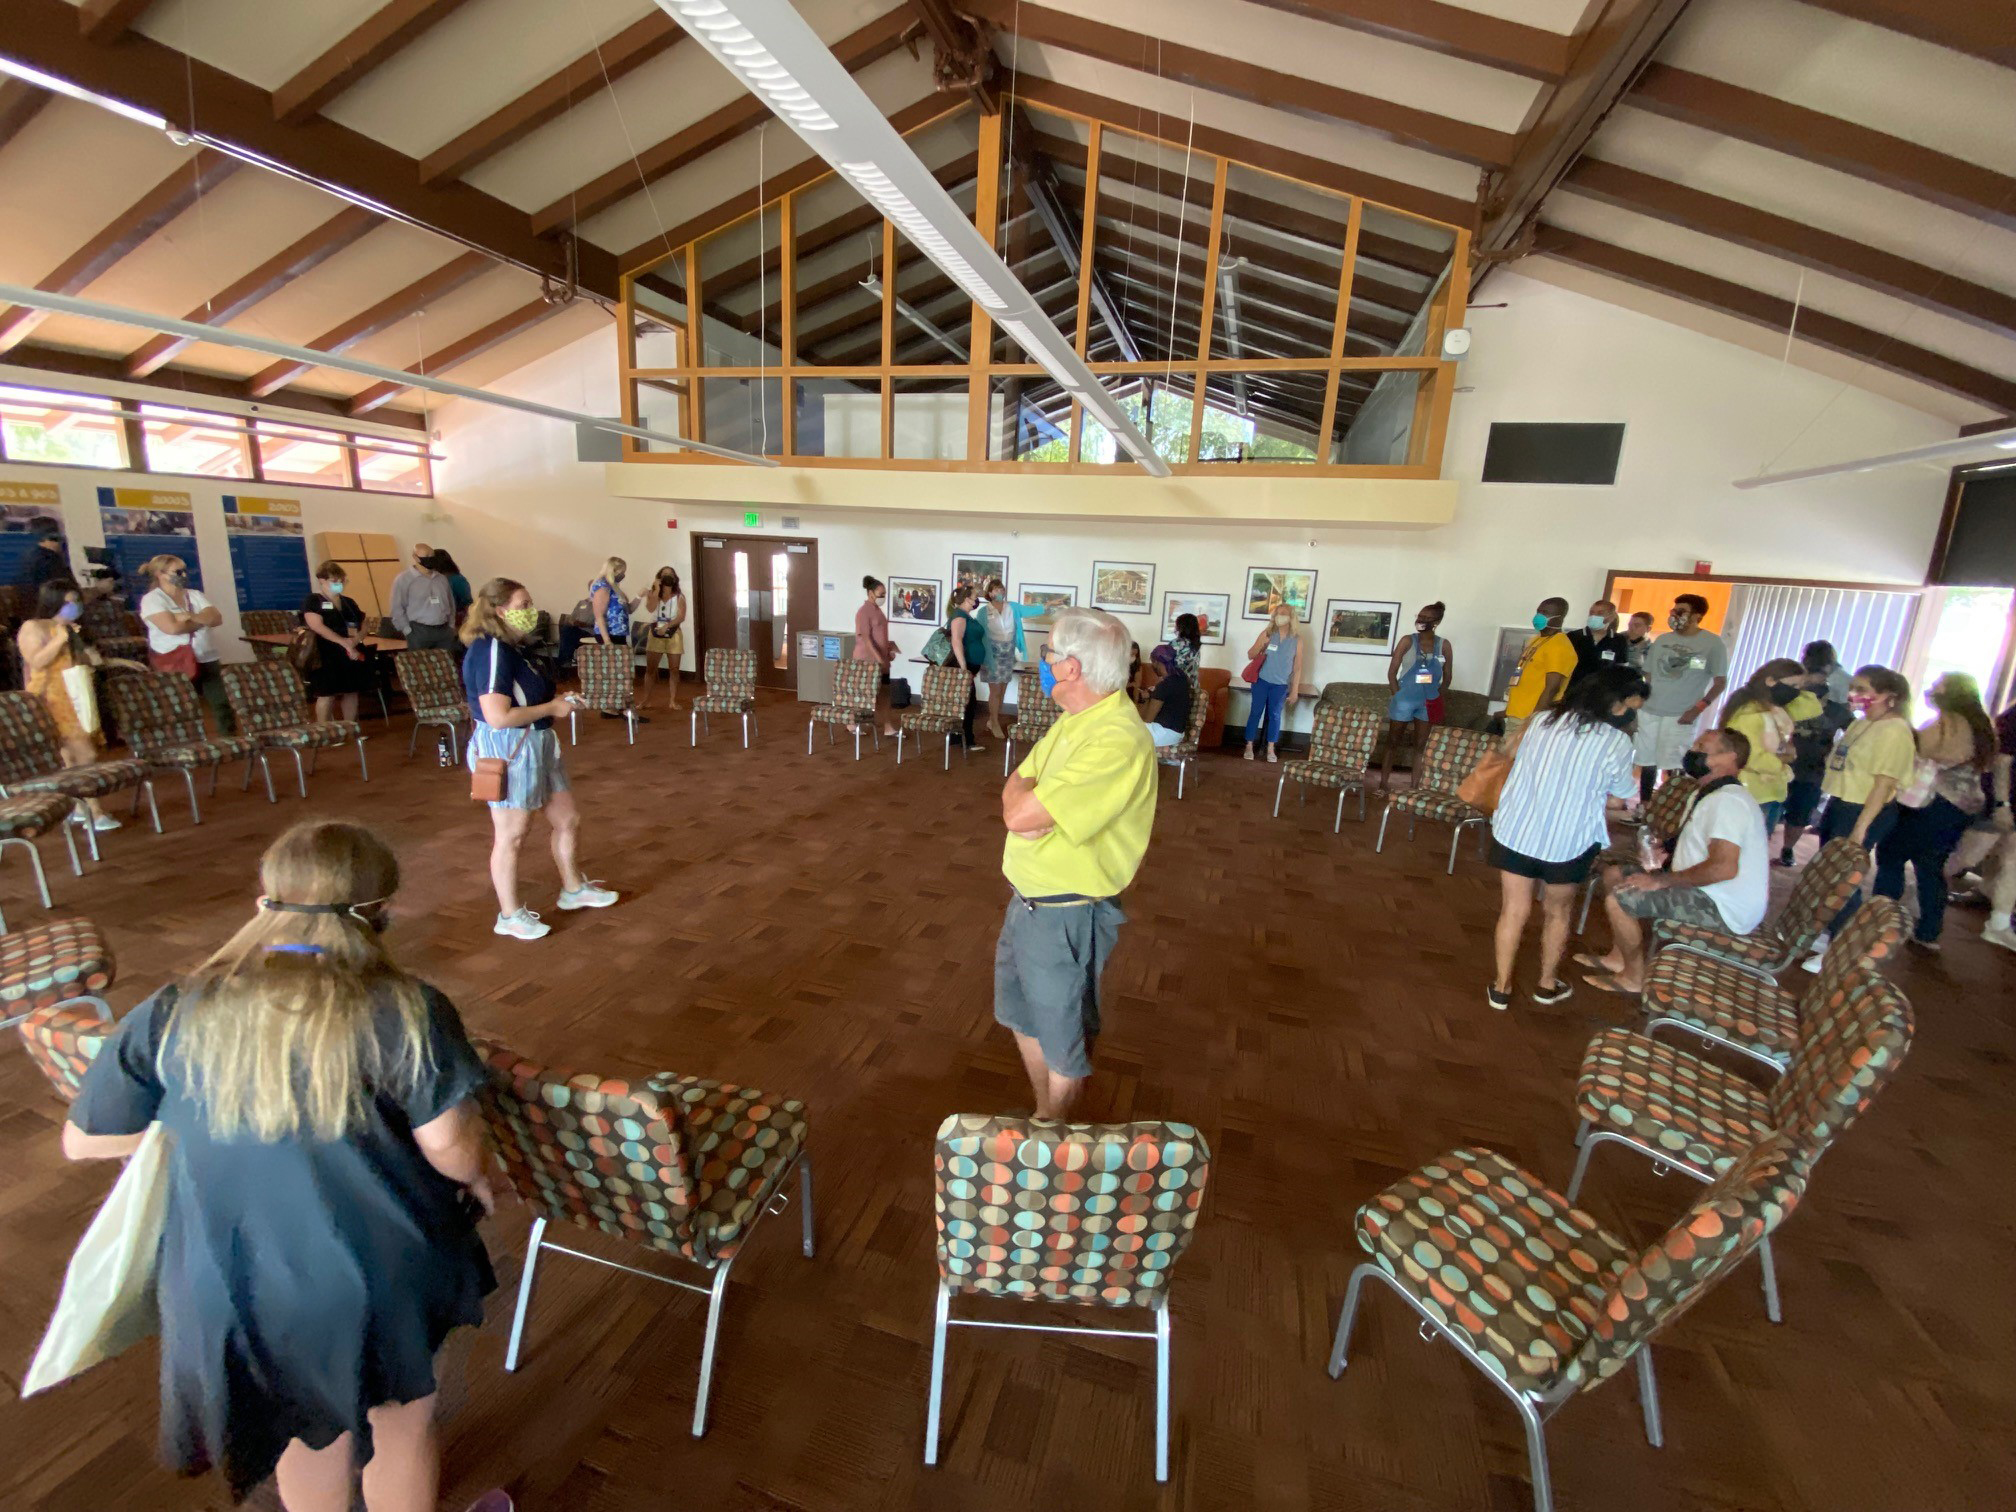 A group of people look around a large room with chairs set up in a circle